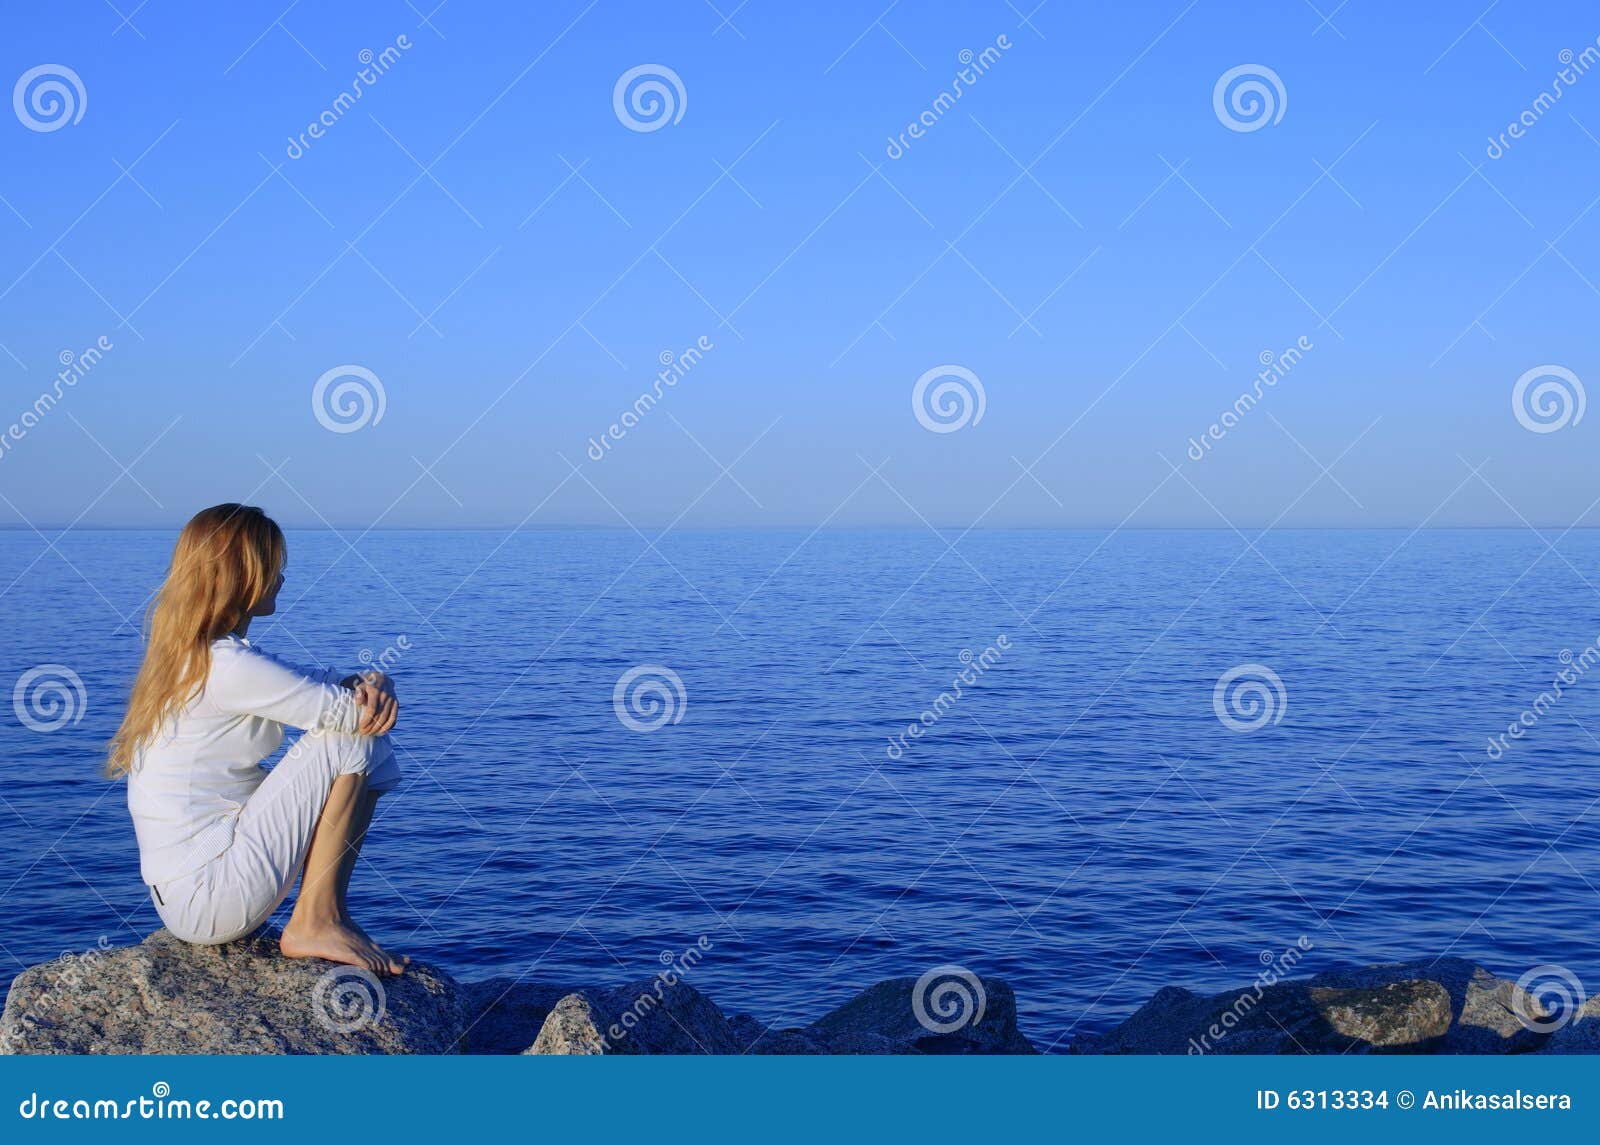 girl sitting on the rock by the peaceful sea